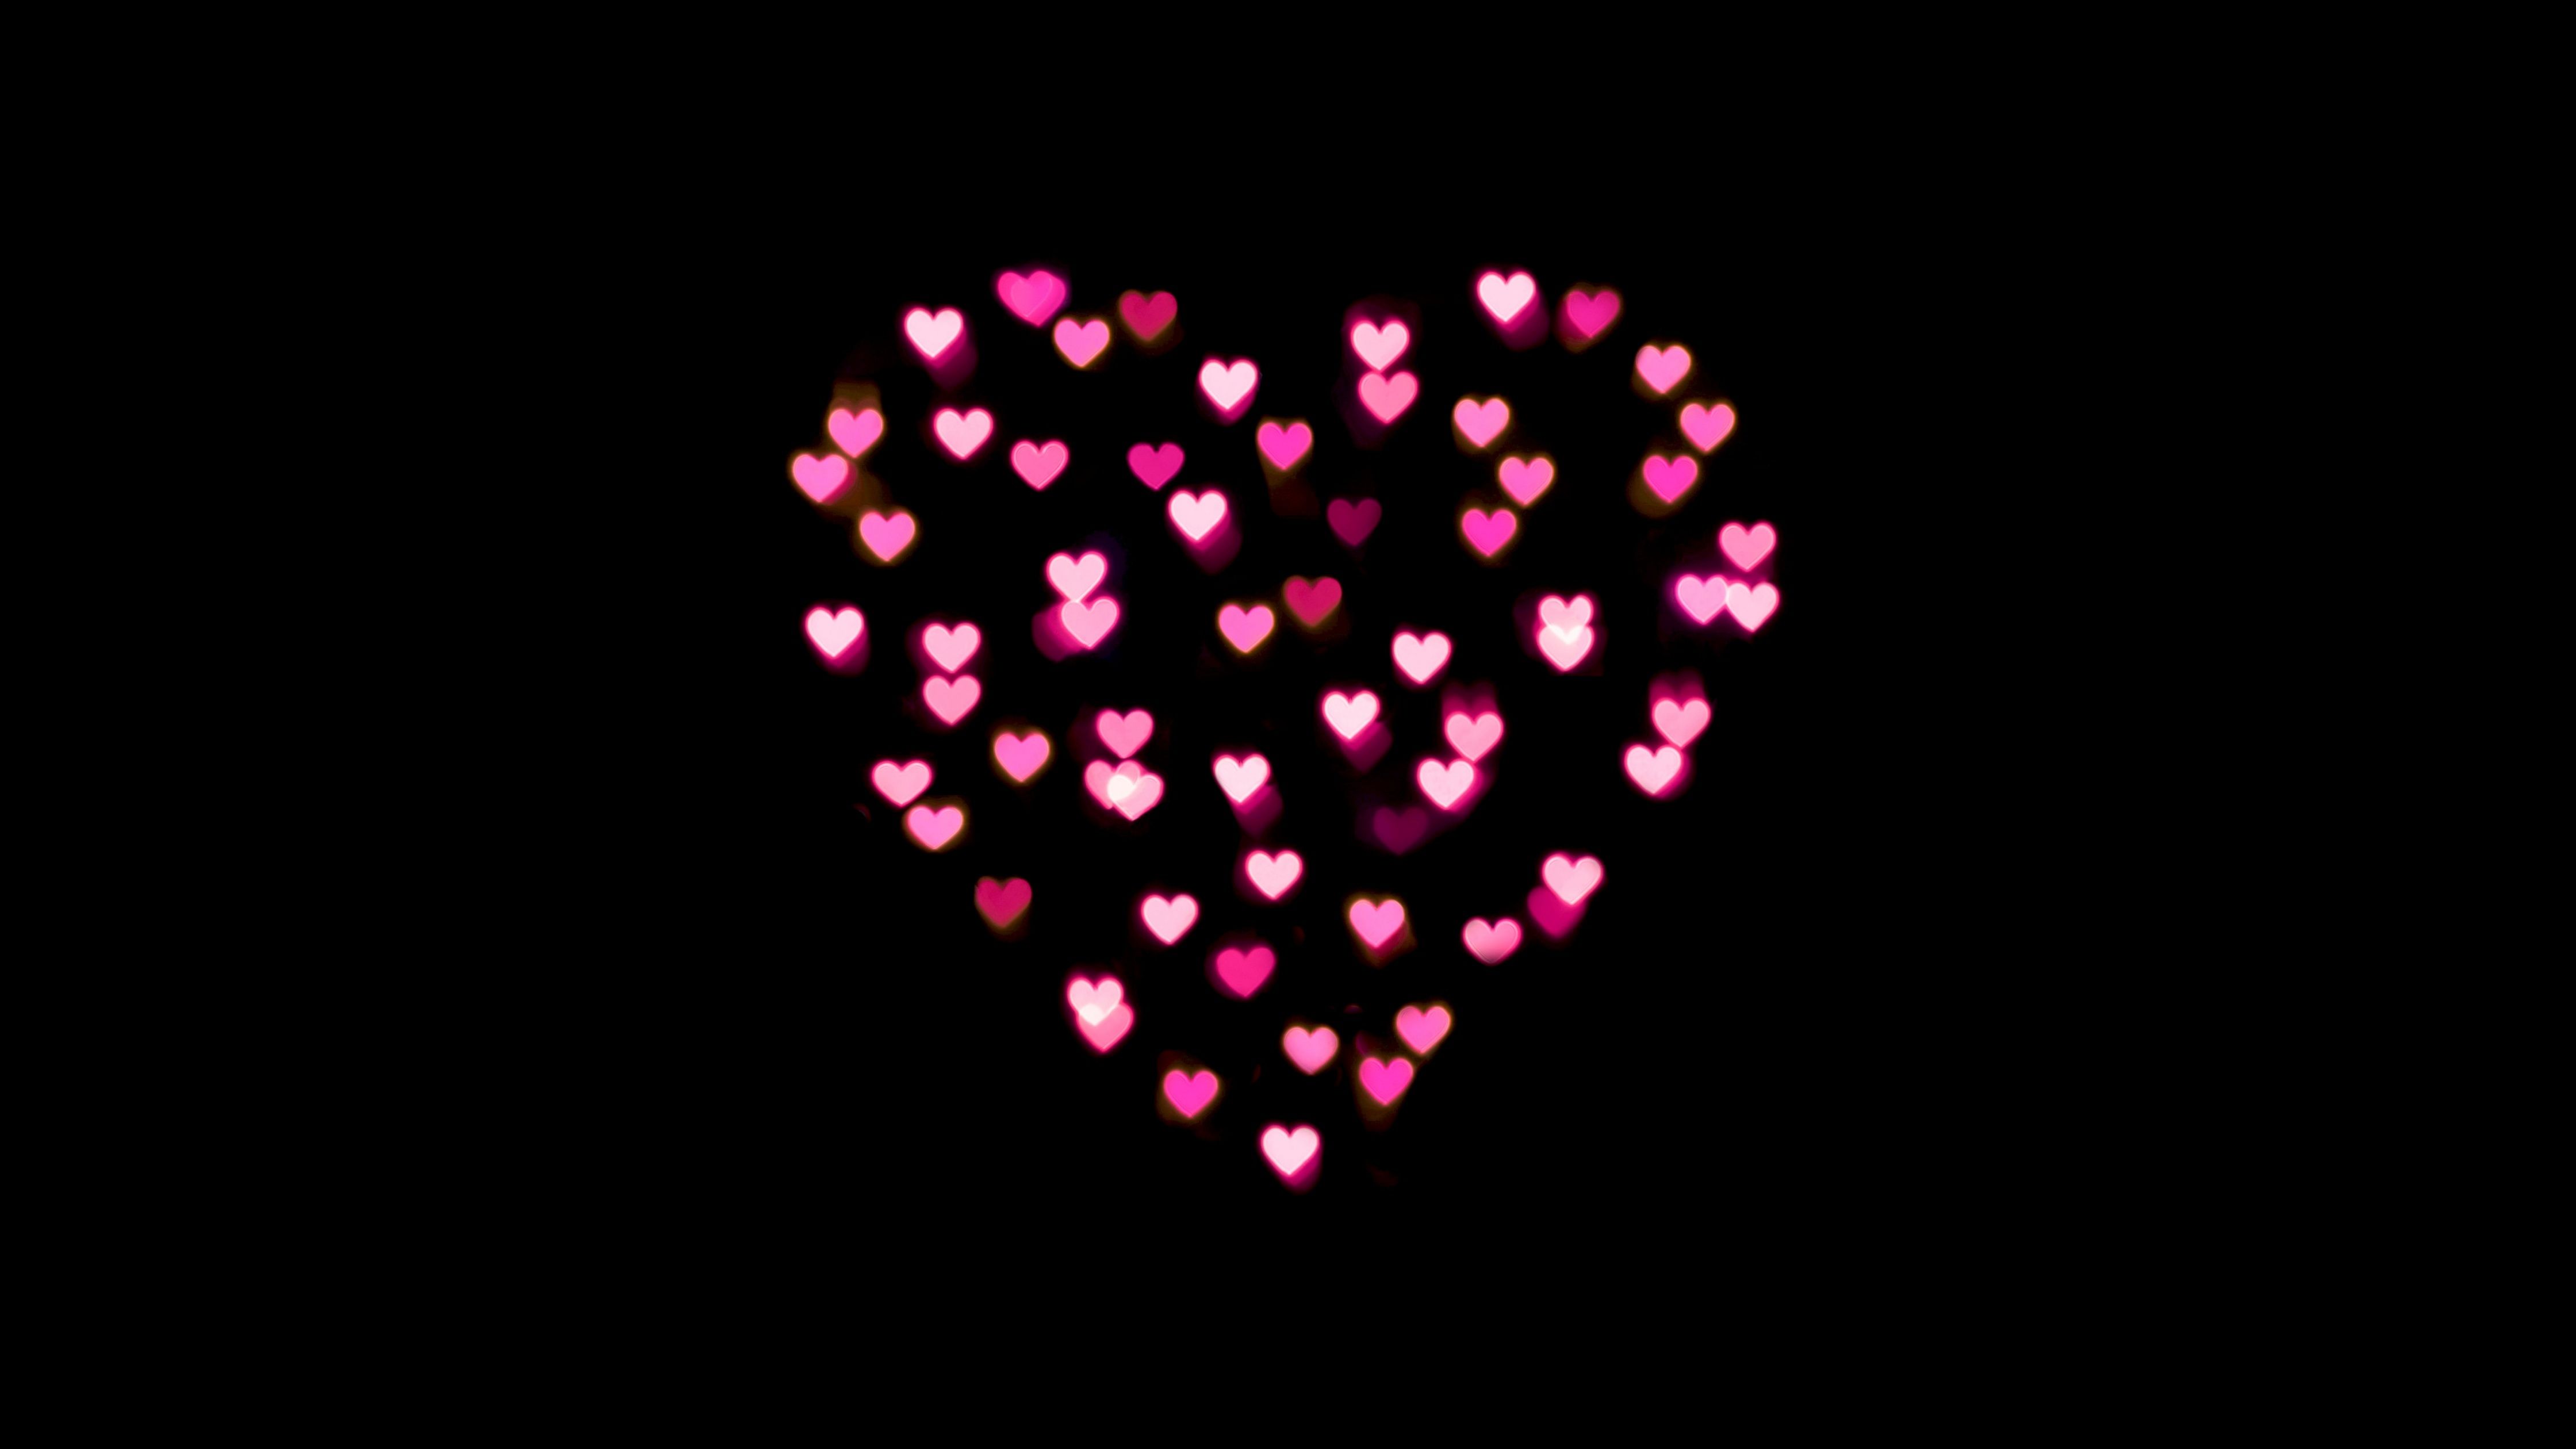 A heart made out of smaller hearts on a black background - Heart, black heart